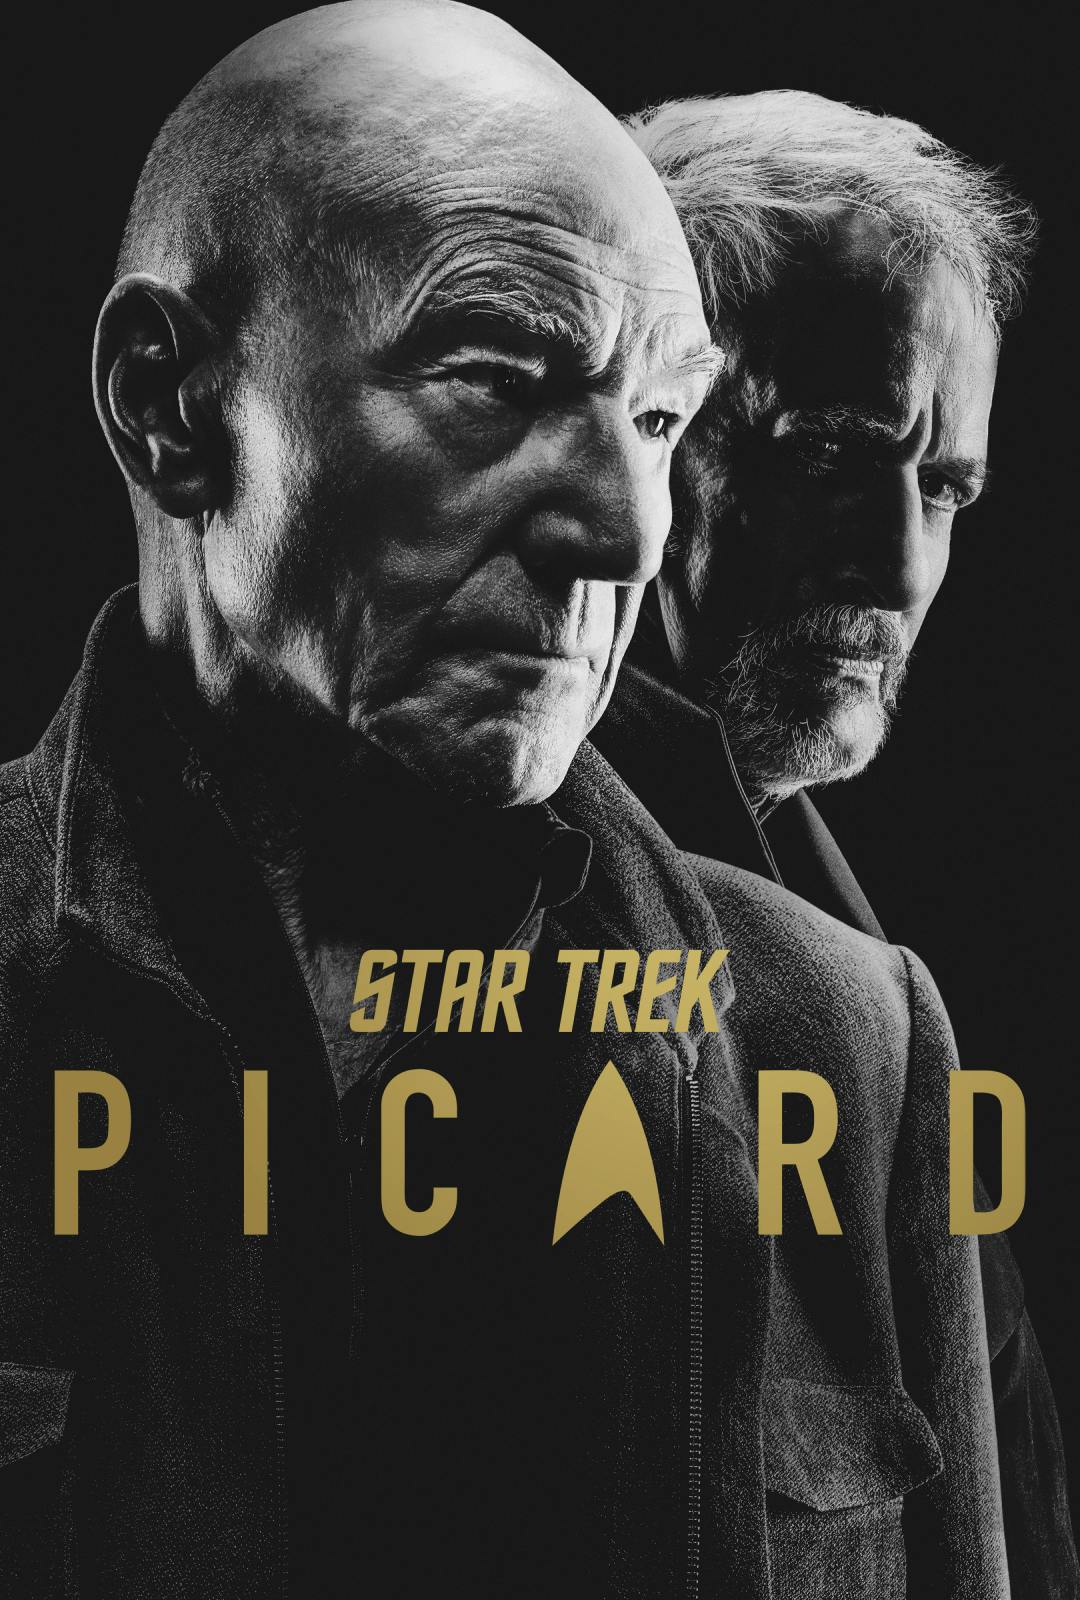 Star Trek: Picard - The Final Season Sets Course for Blu-ray, DVD & Limited- Edition Blu-ray Steelbook Release